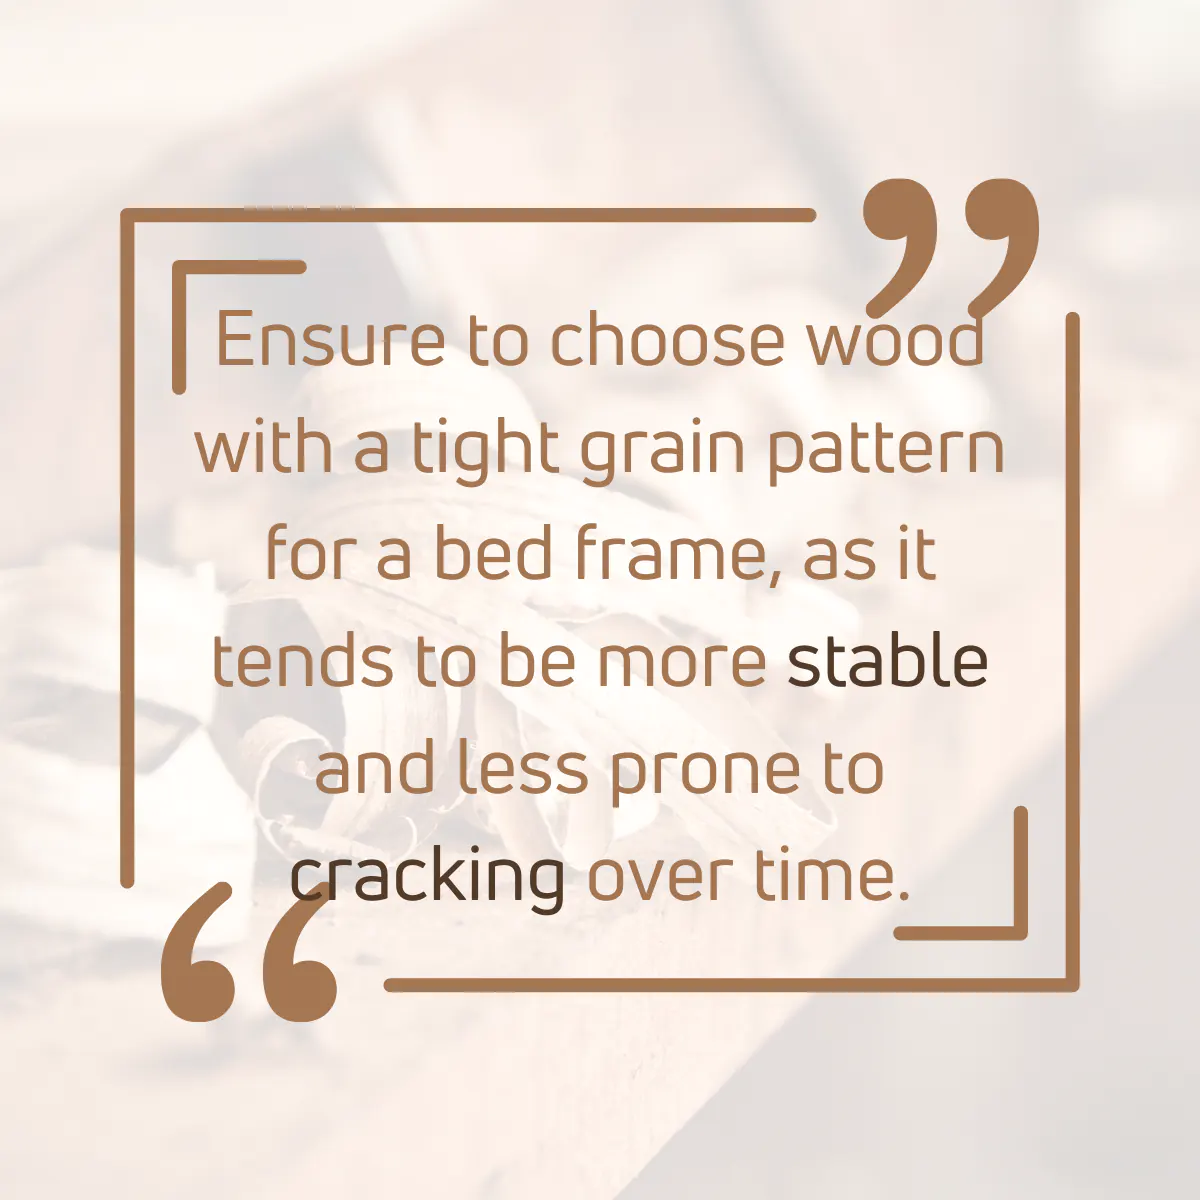 Tip for selecting wood for bed frames